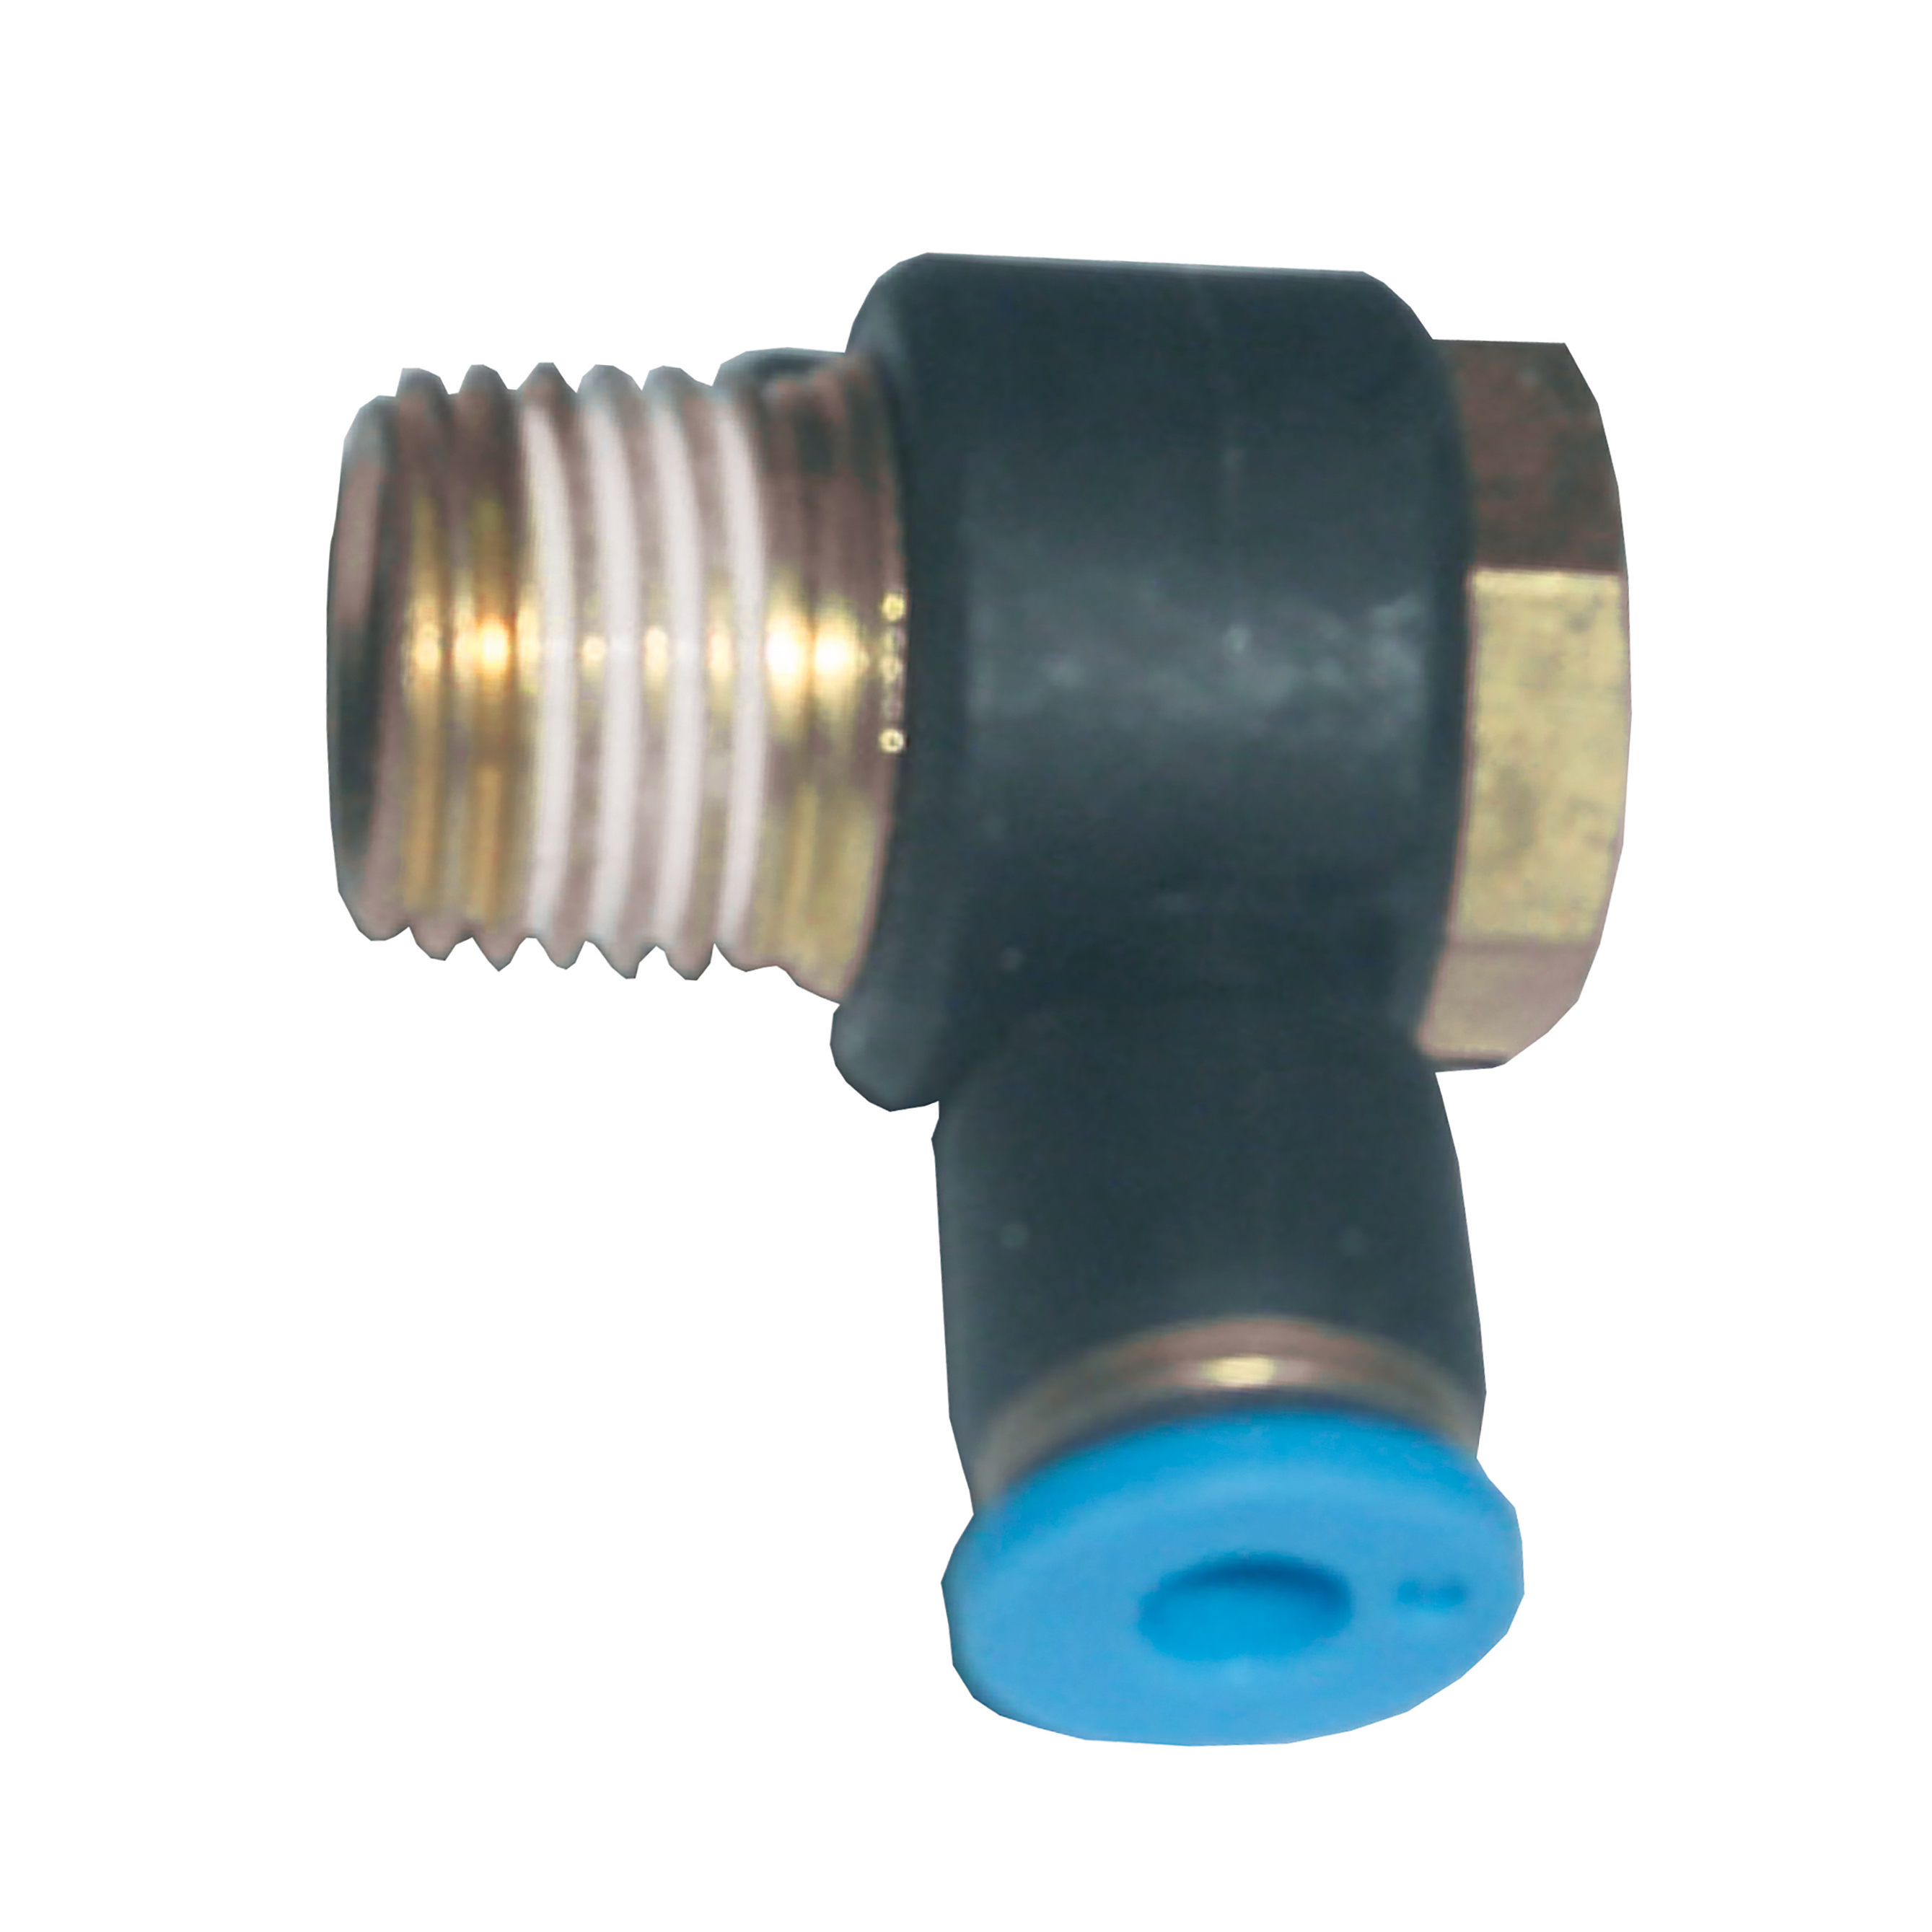 Push-in T-fitting, G⅛ male-female, hose-Ø4, B(L): 24 mm, AF 10 mm, MOP 145 psi, rotatable, cylindrical thread w. embedded o-ring